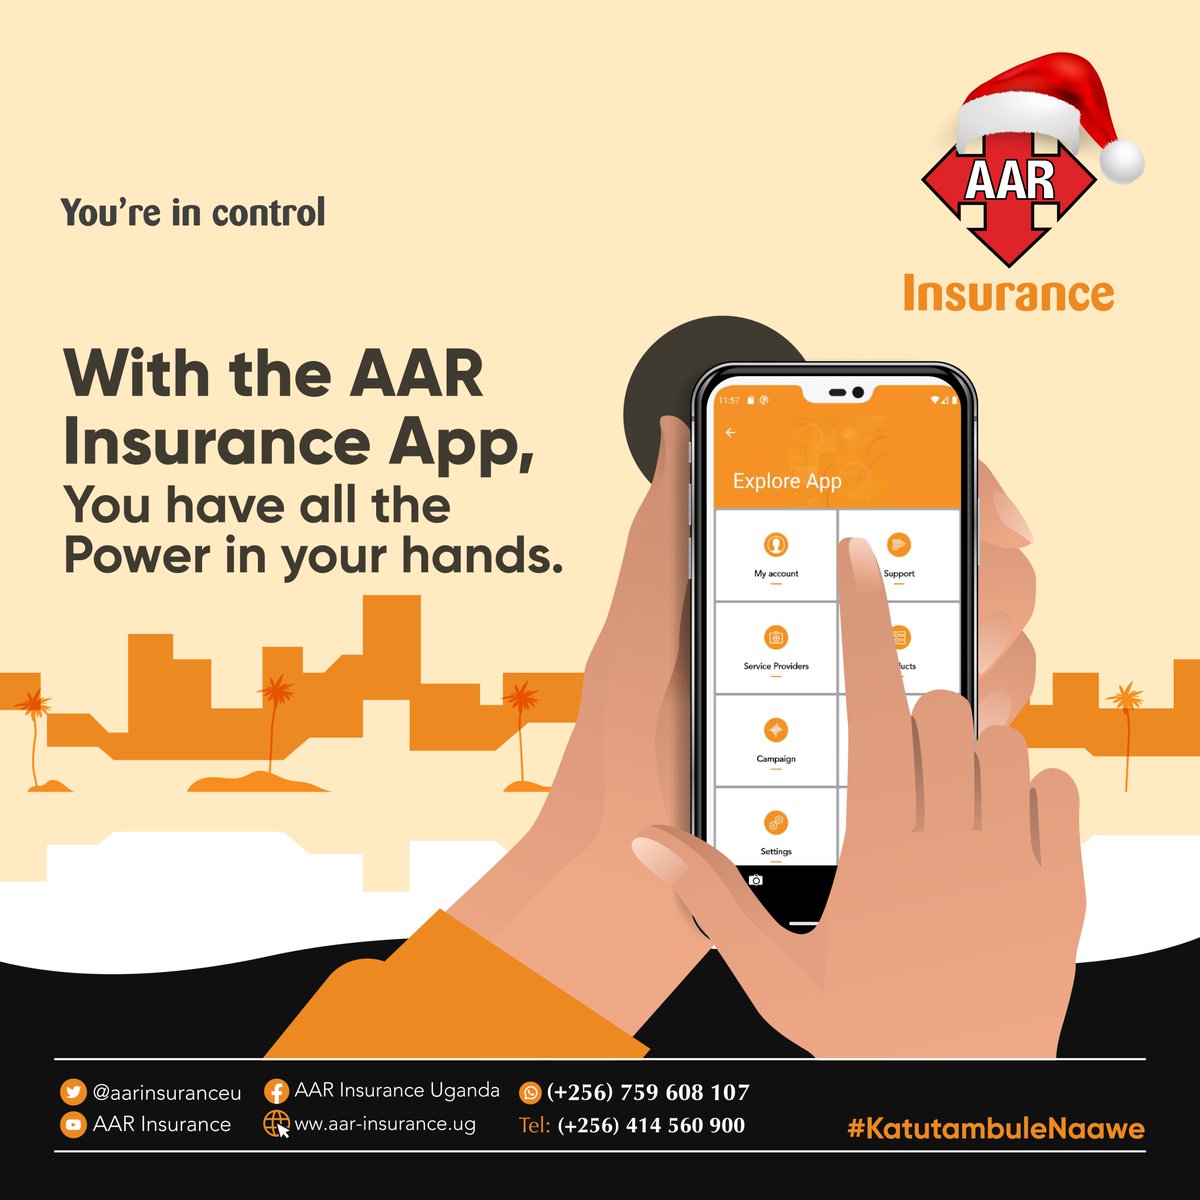 Empowering people to take control of the things that matter the most. Download the app today. #AARInsurance #KatutambuleNawe